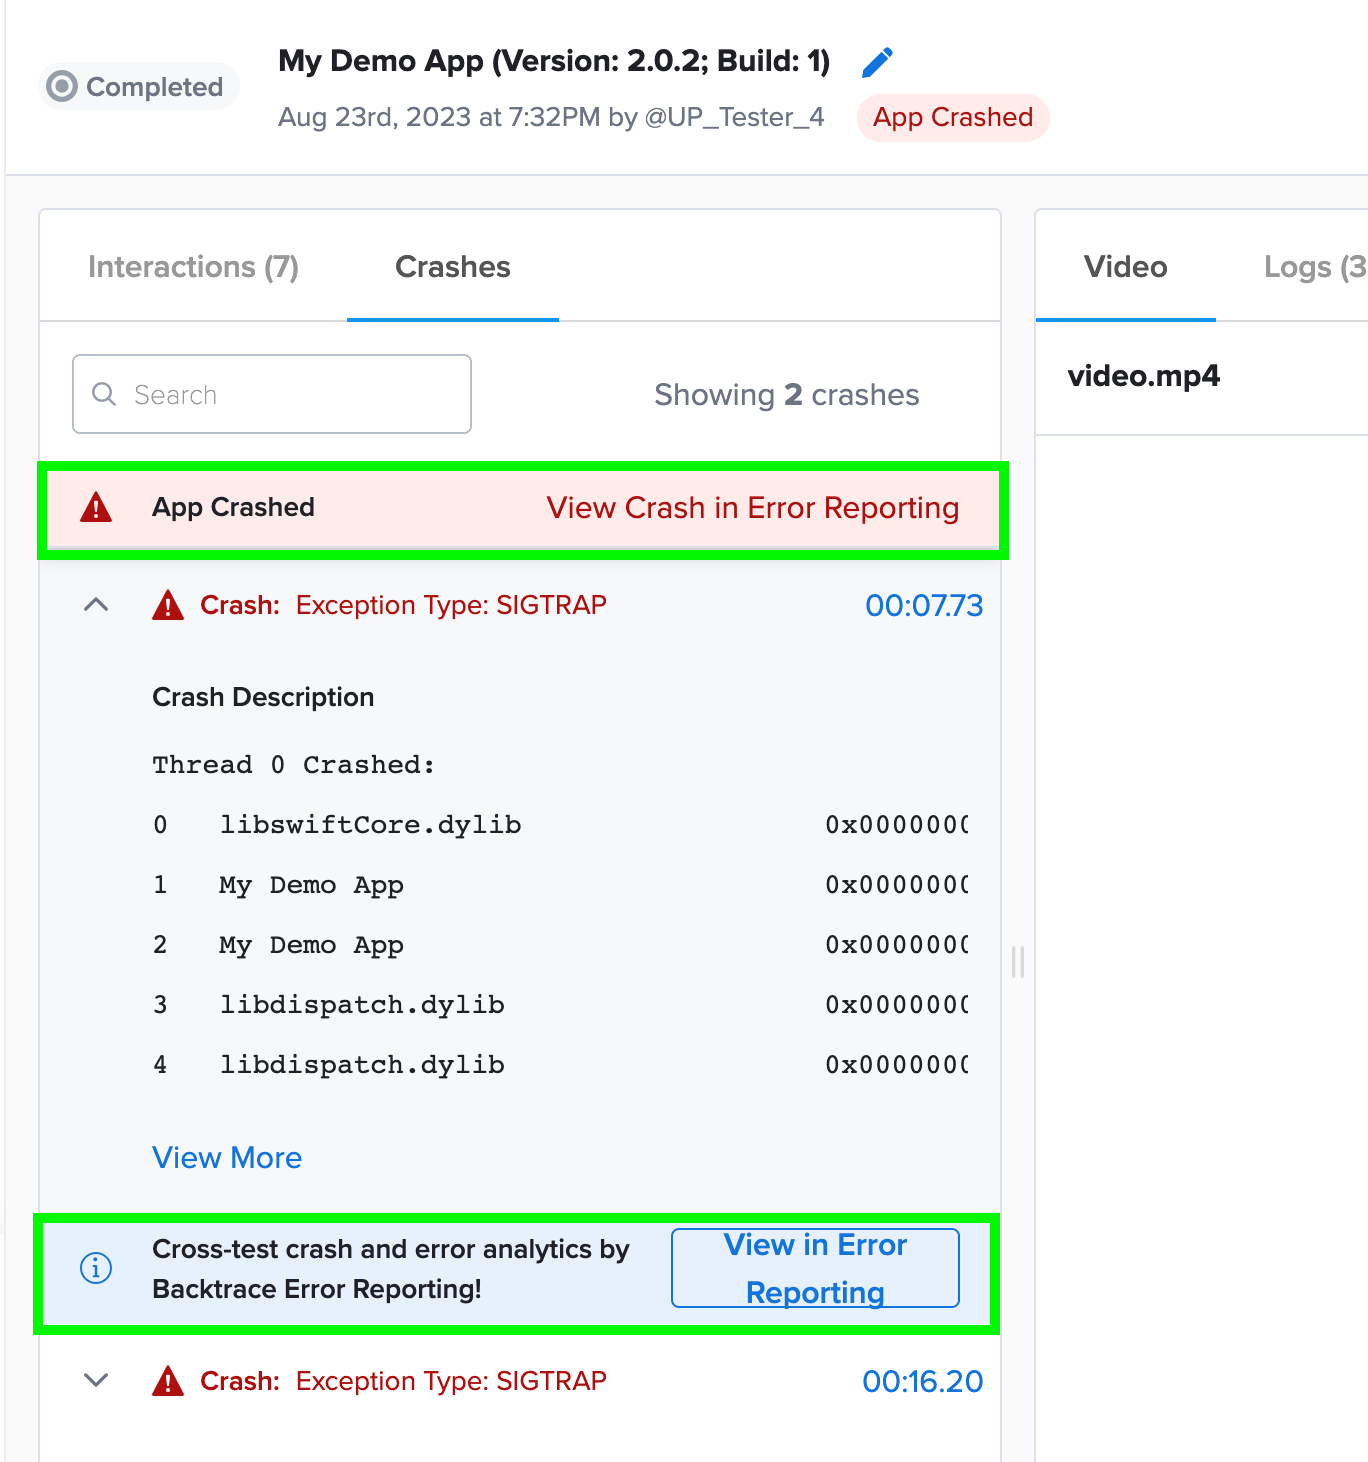 view crash in error reporting link in Crashes tab